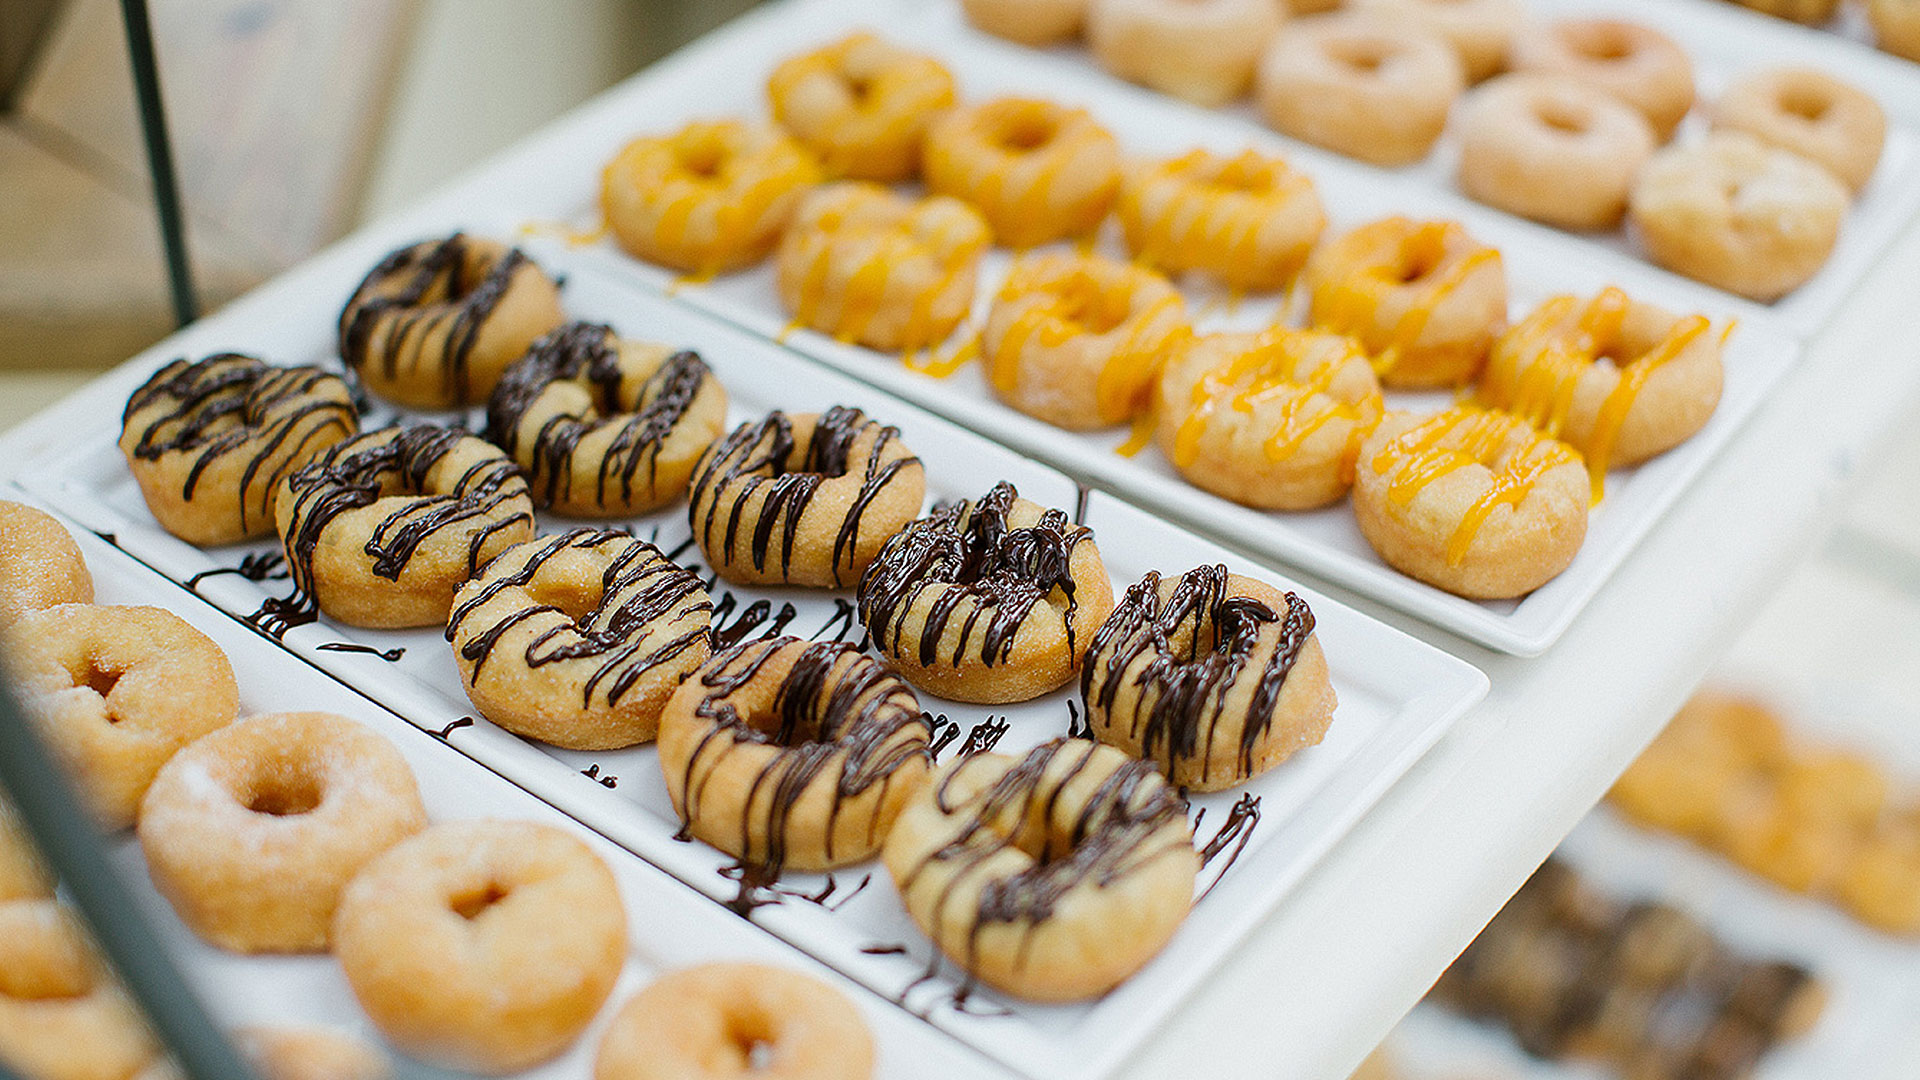 Guests will love these flavoured doughnuts at the sweet table - wedding reception ideas